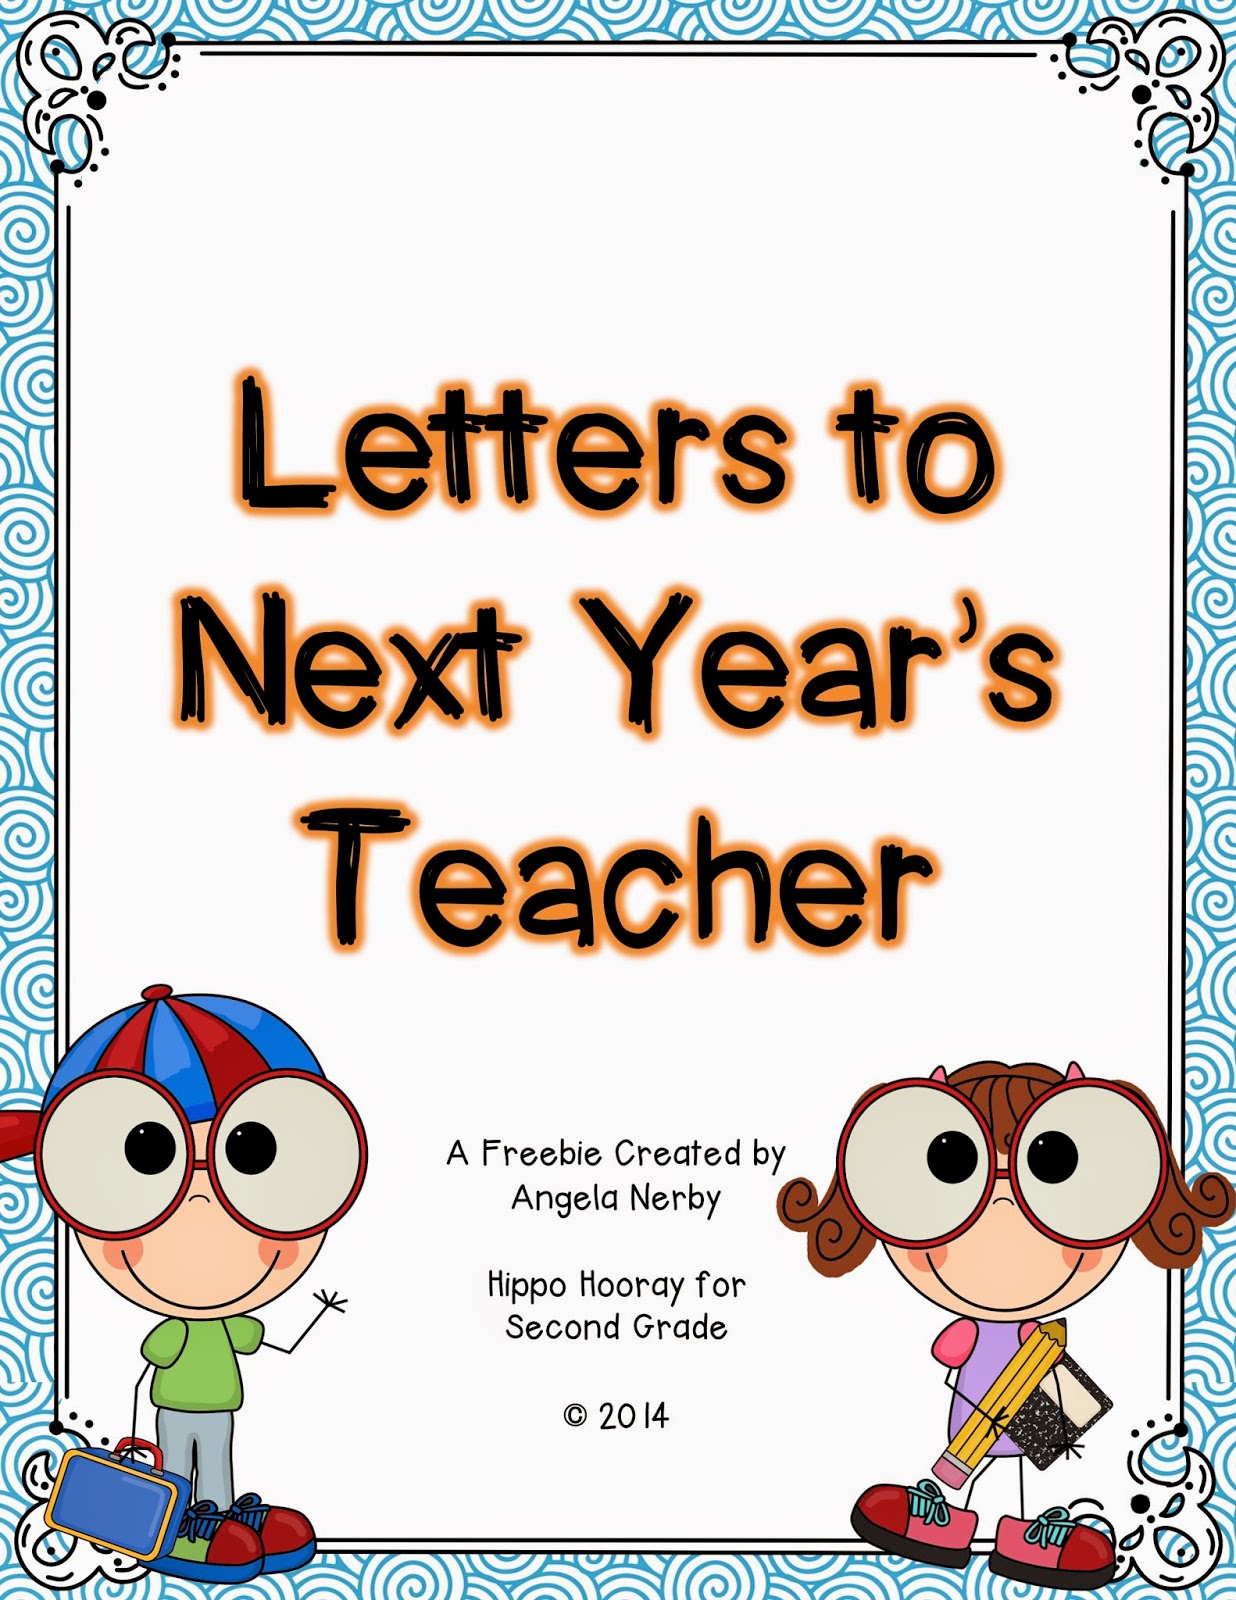 KEEP CALM! Letters to Next Year's Teacher - Hippo Hooray for Second Grade!